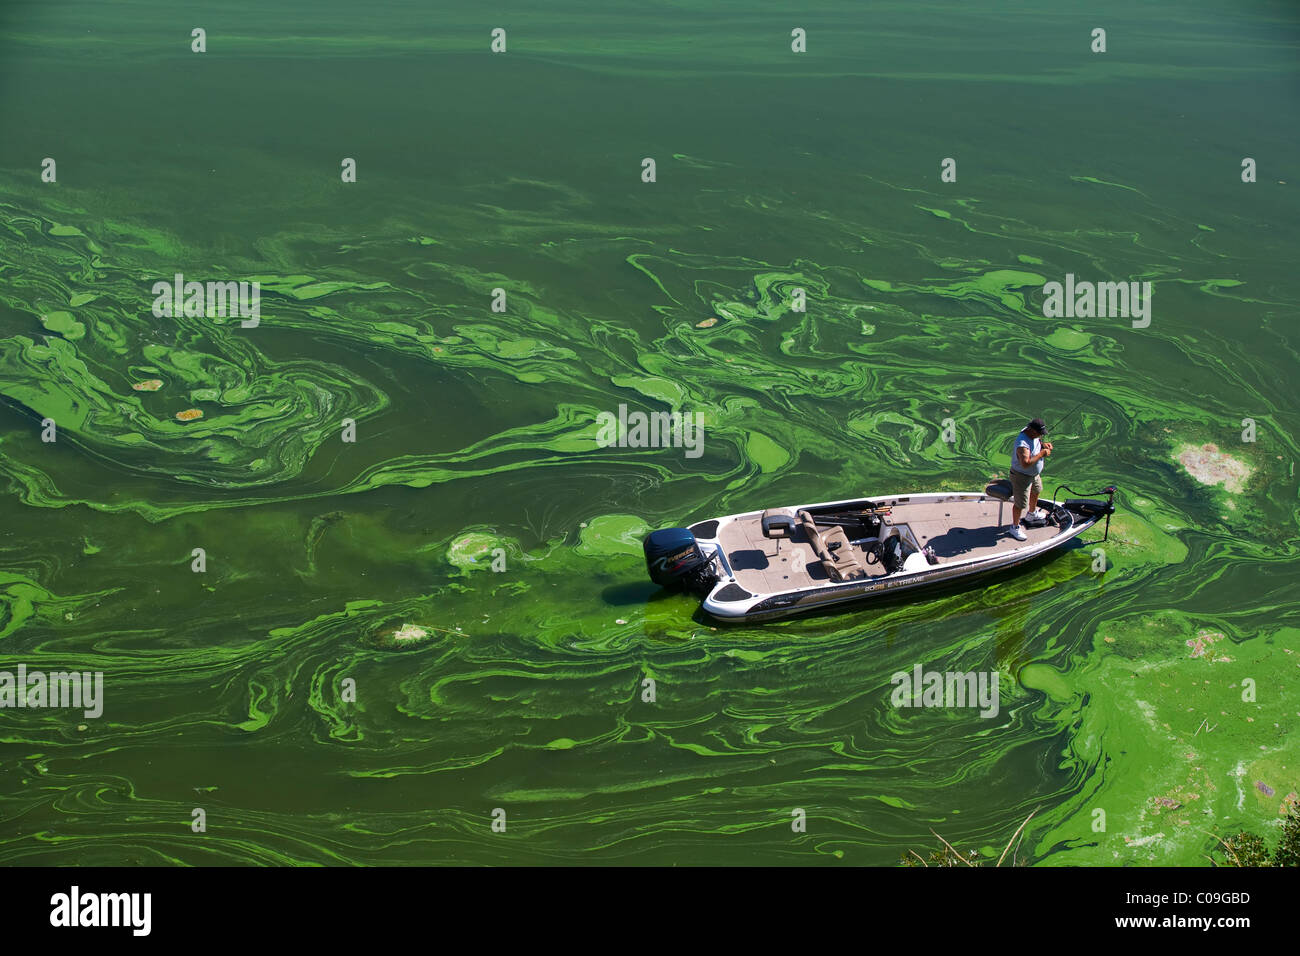 A bass fisherman casts for fish in the Toxic Blue Green Algae in the Copco Reservoir in Northern California. Stock Photo